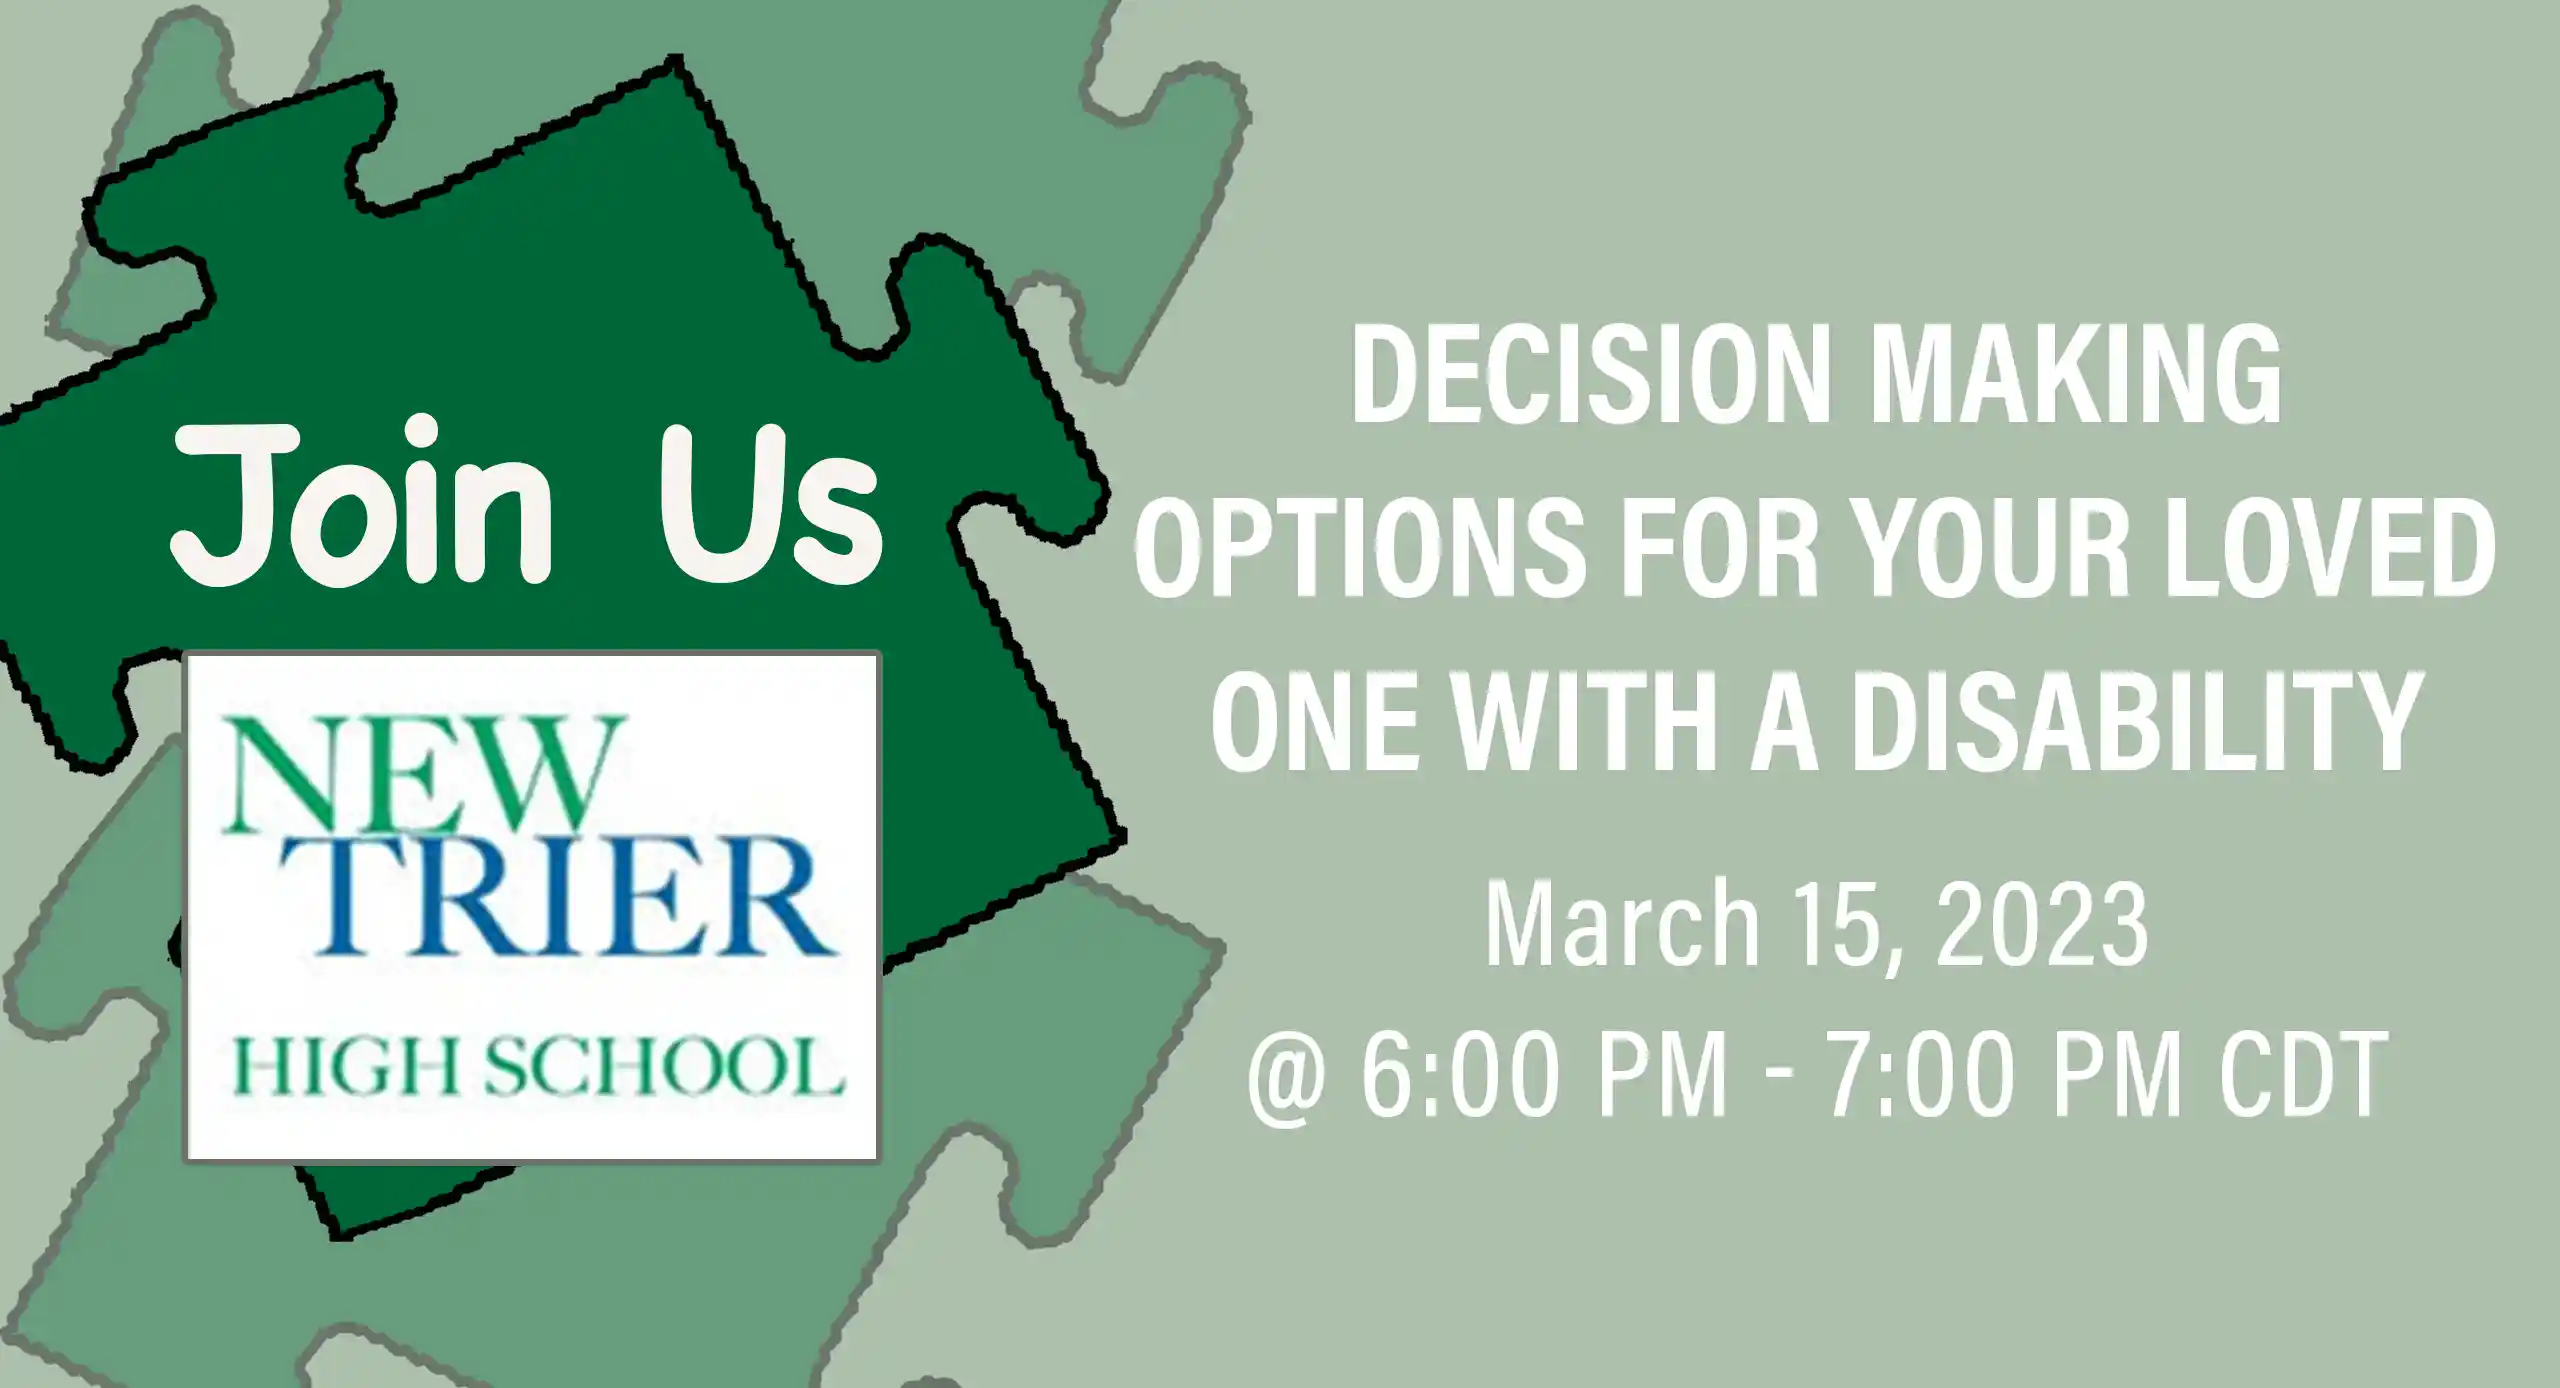 Decision-Making-Options-for-Your-Loved-One-with-A-Disability-March-15-2023 banner